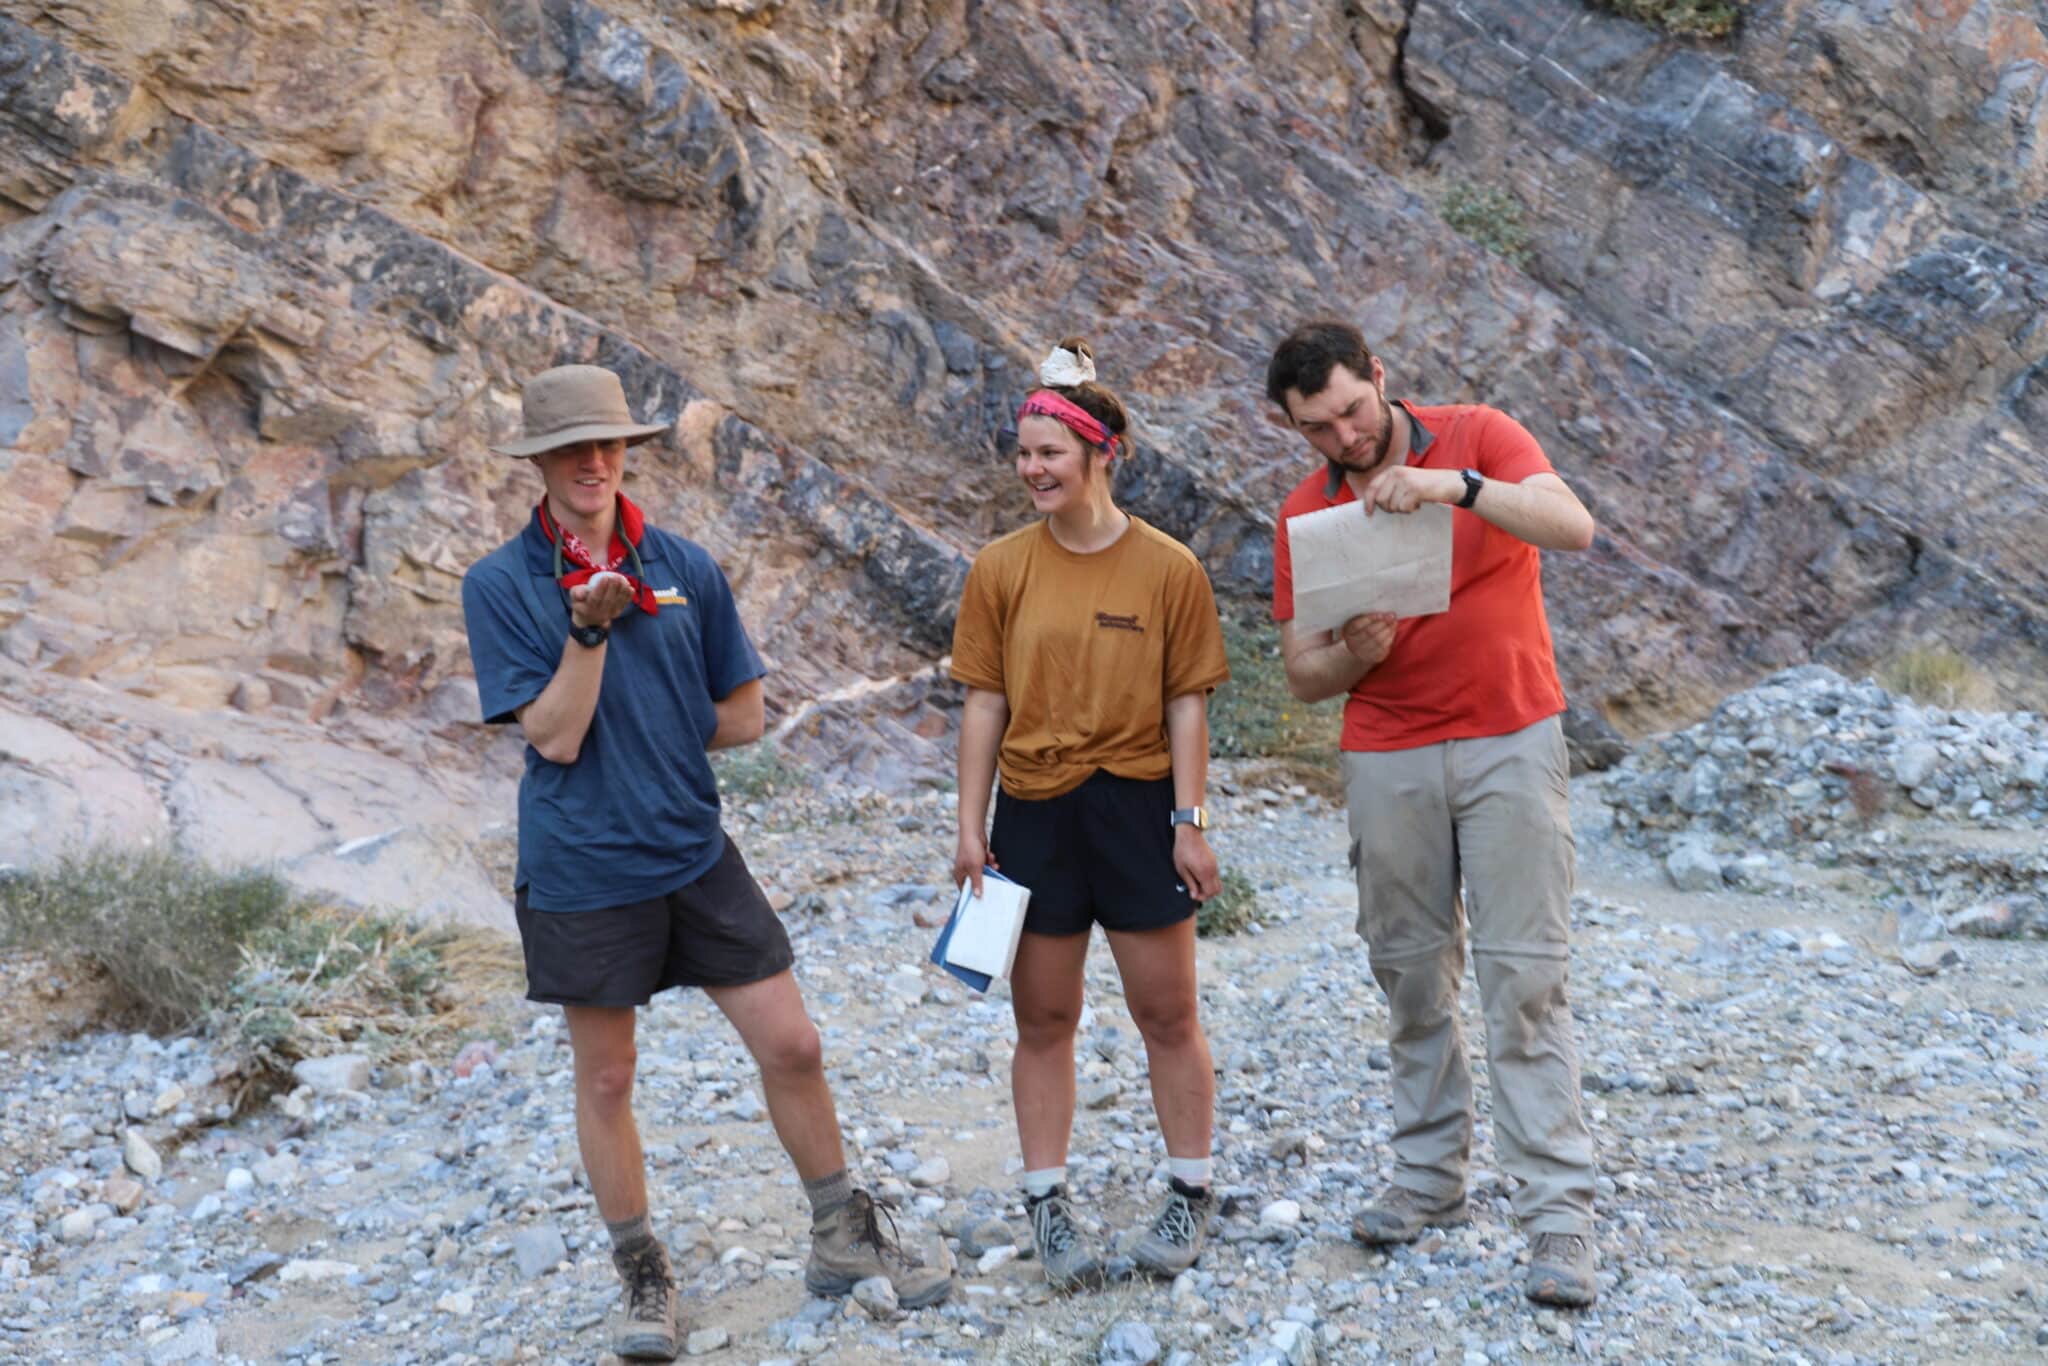 Christian outdoor adventure study abroad students in death valley